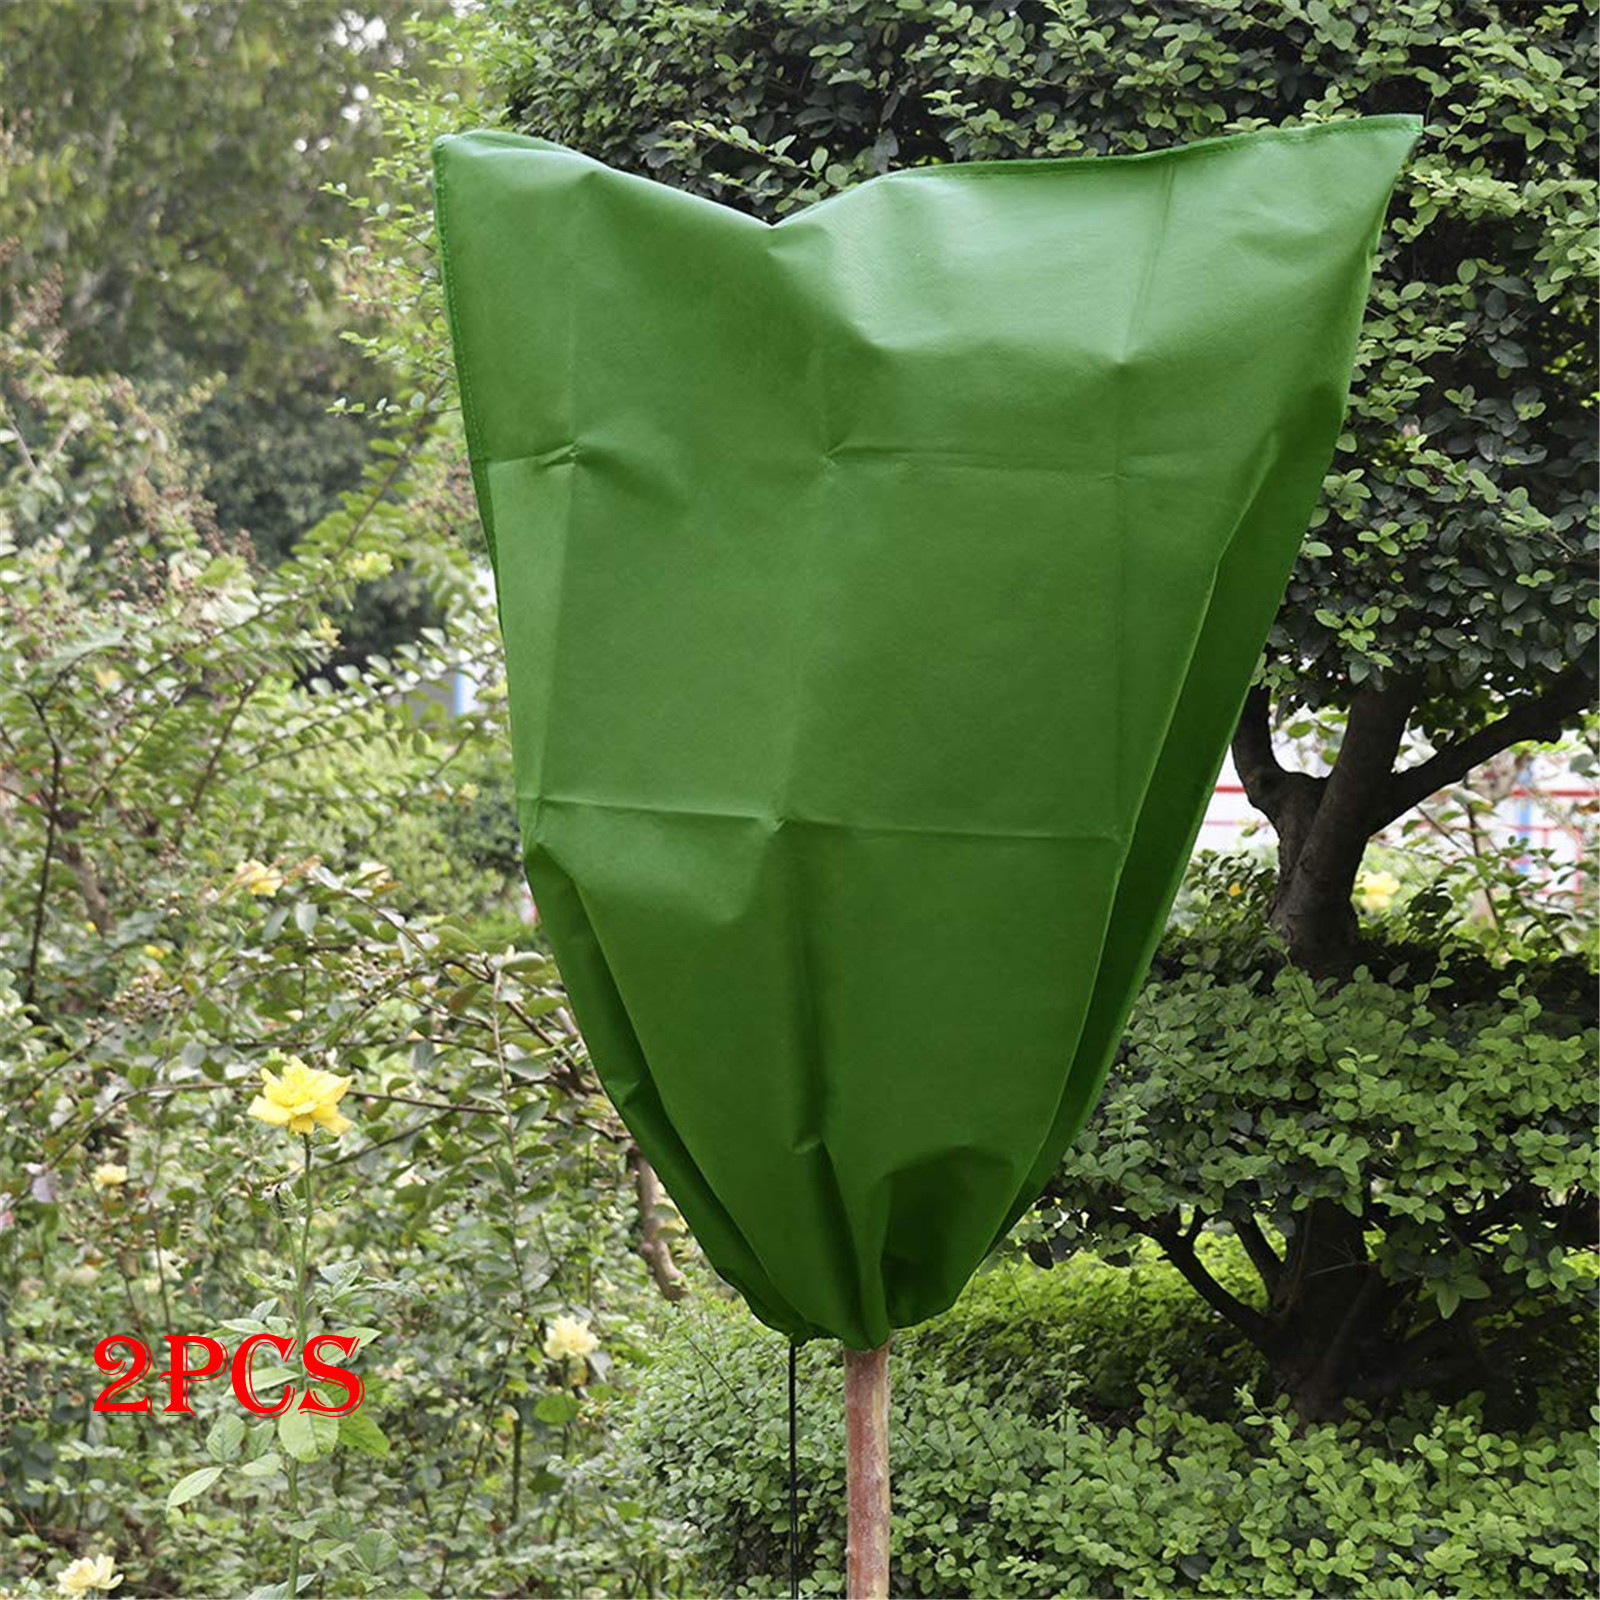 Cover Tree Bag Garden Warm Yard Frost Protecting Protection Wint